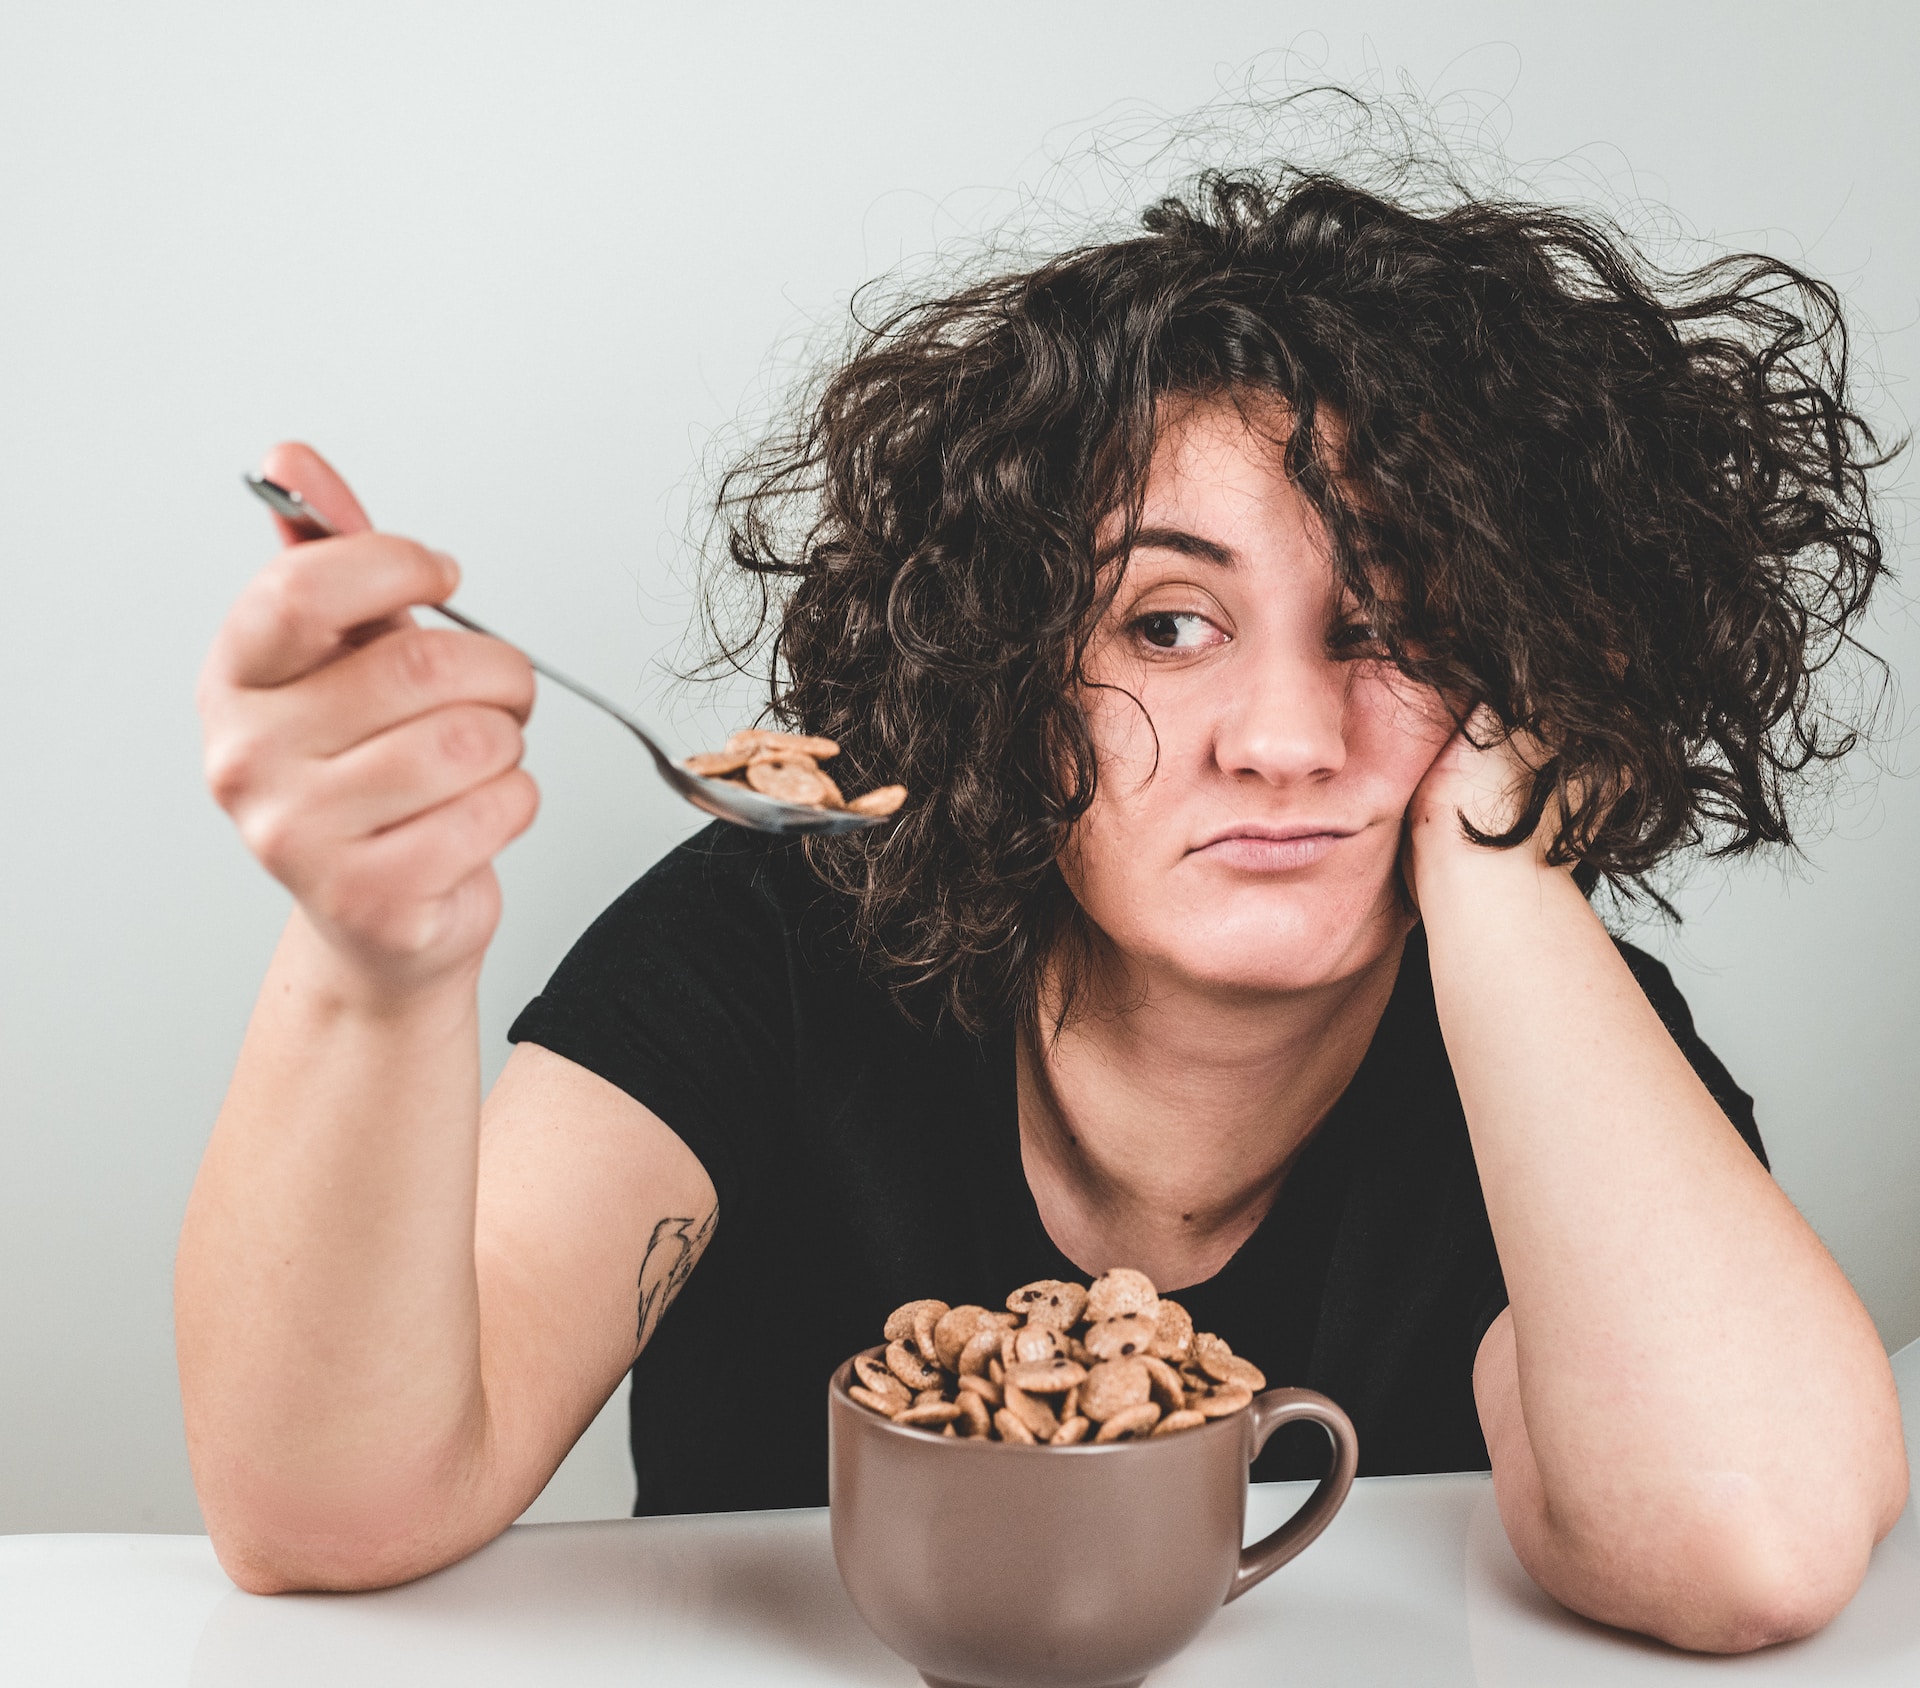 woman holding a spoonful of cereal